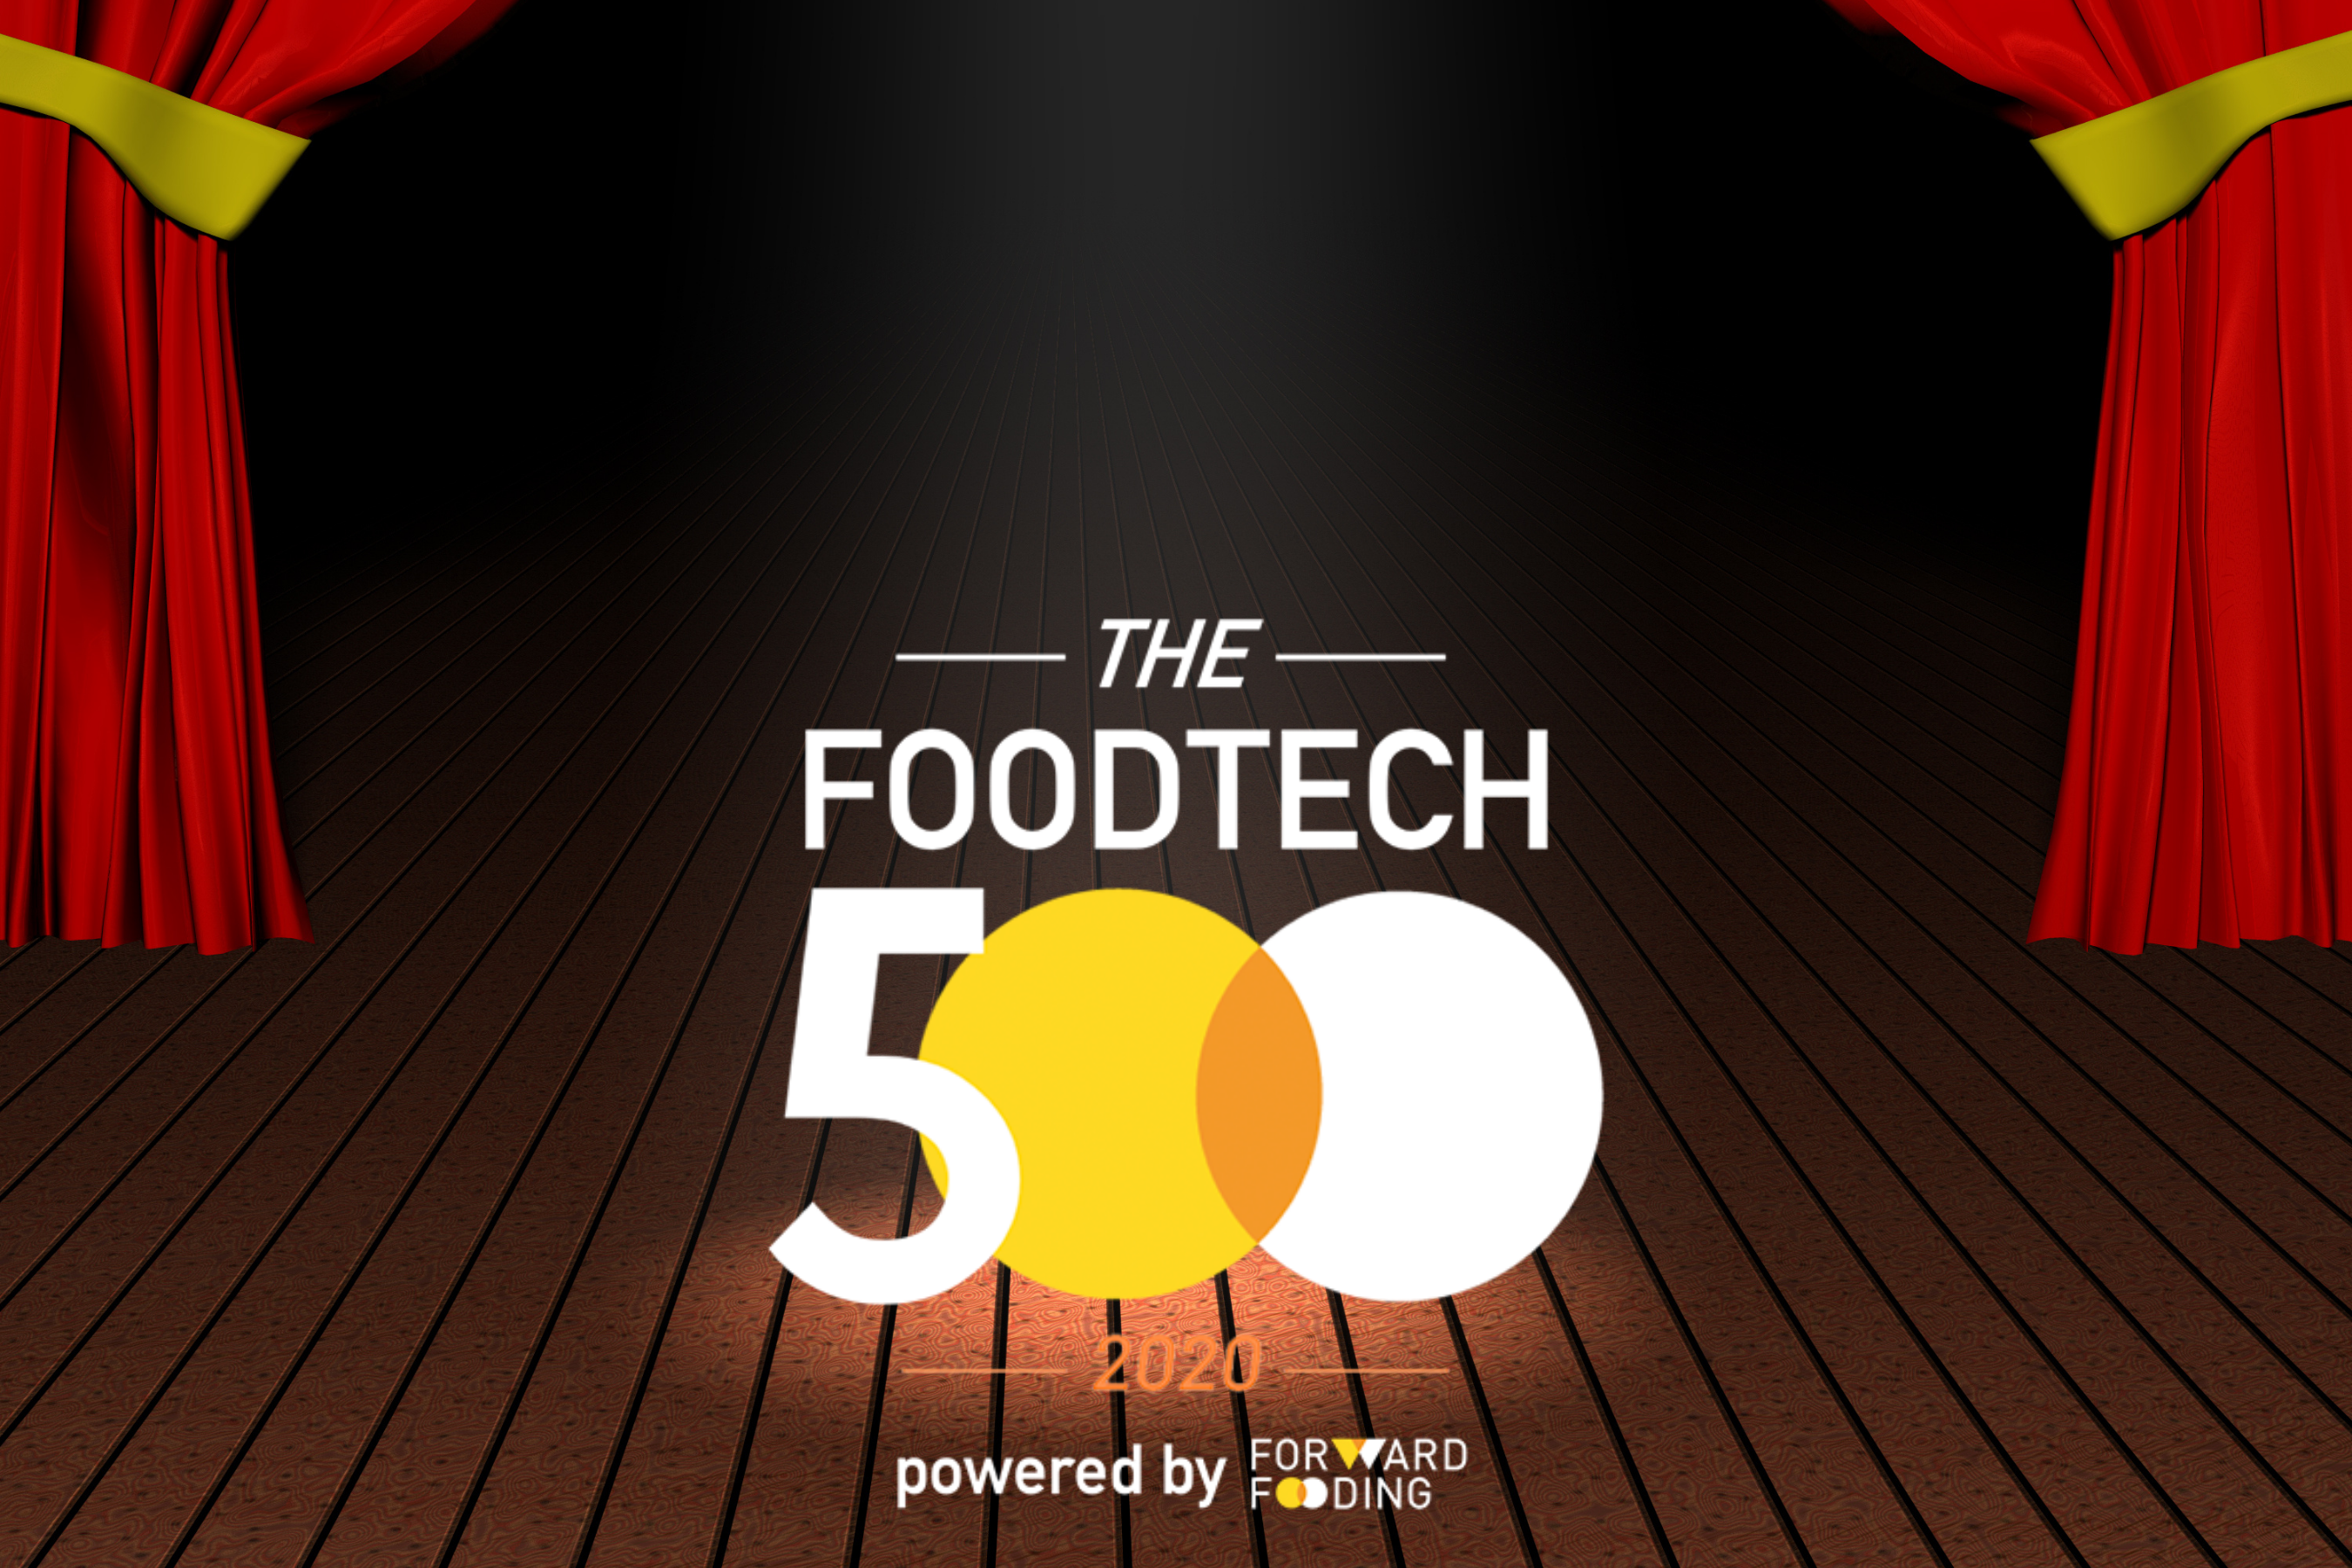 CURTAIN UP ON FOODTECH500 2020